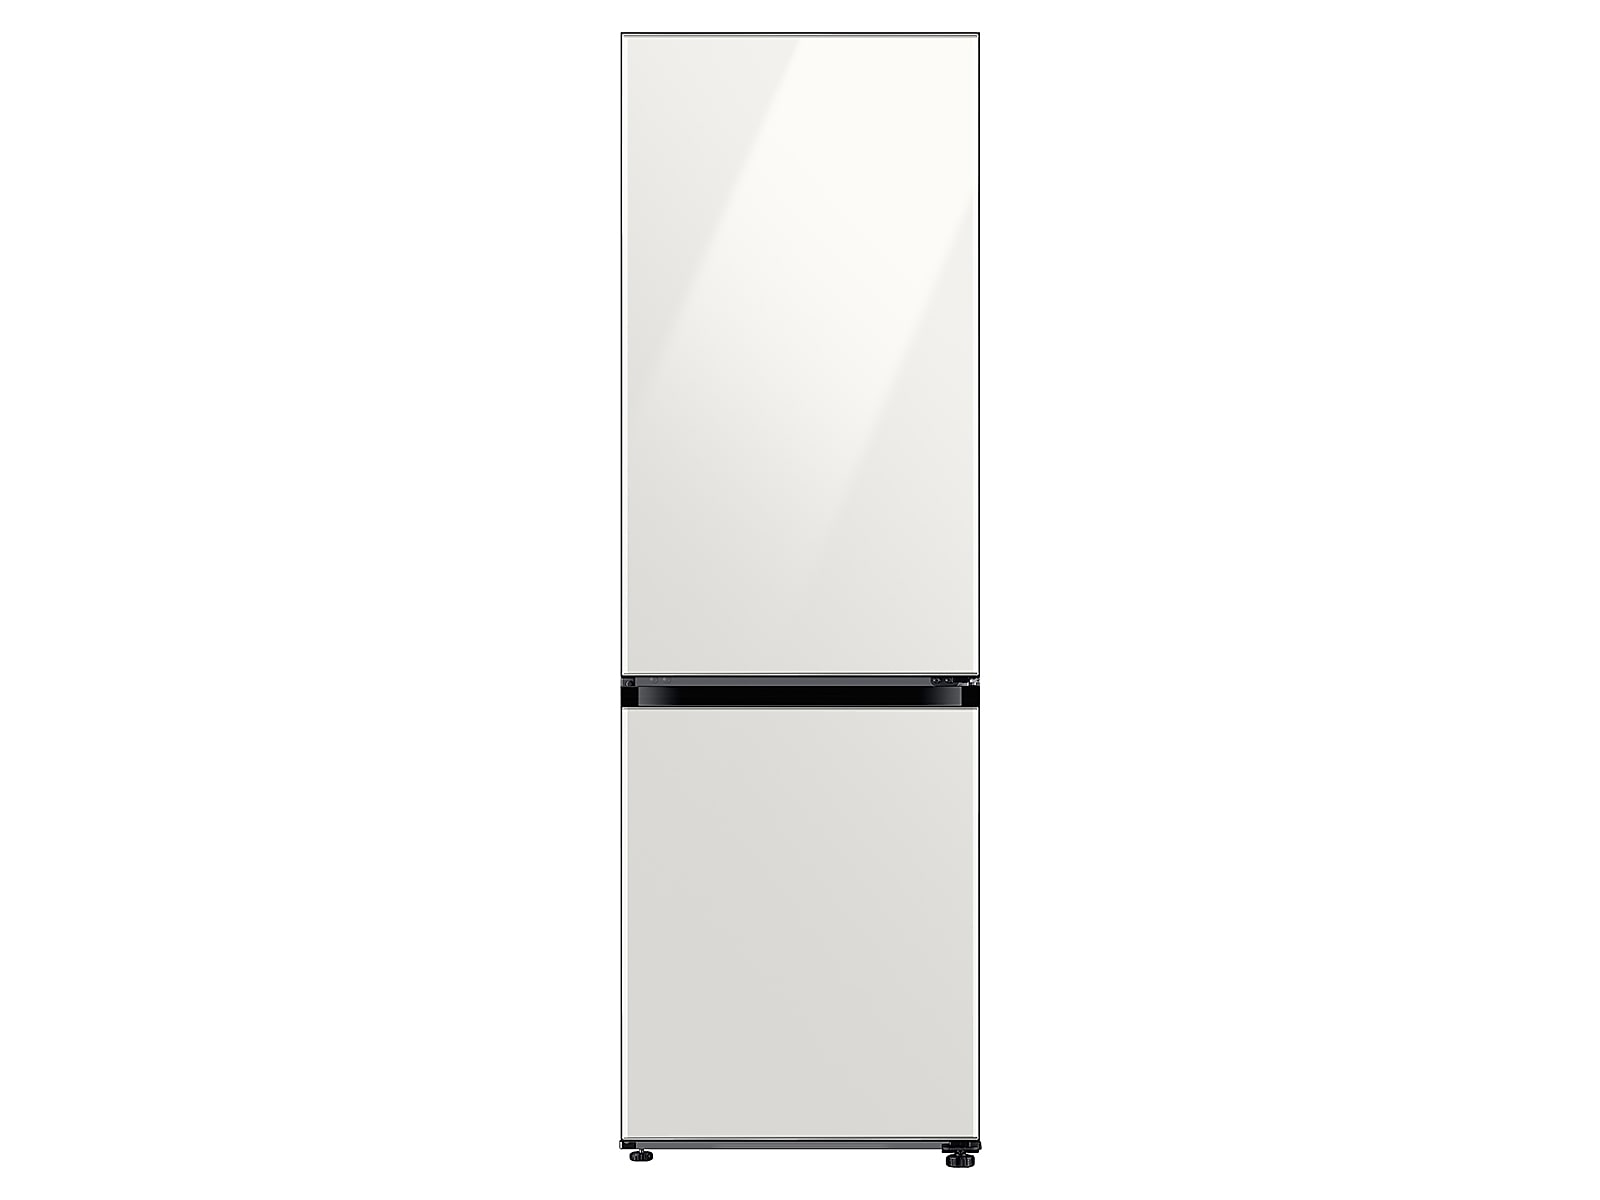 Samsung 12.0 cu. Ft. Bespoke Bottom Freezer Refrigerator with Flexible Design in White Glass(RB12A300635/AA) photo